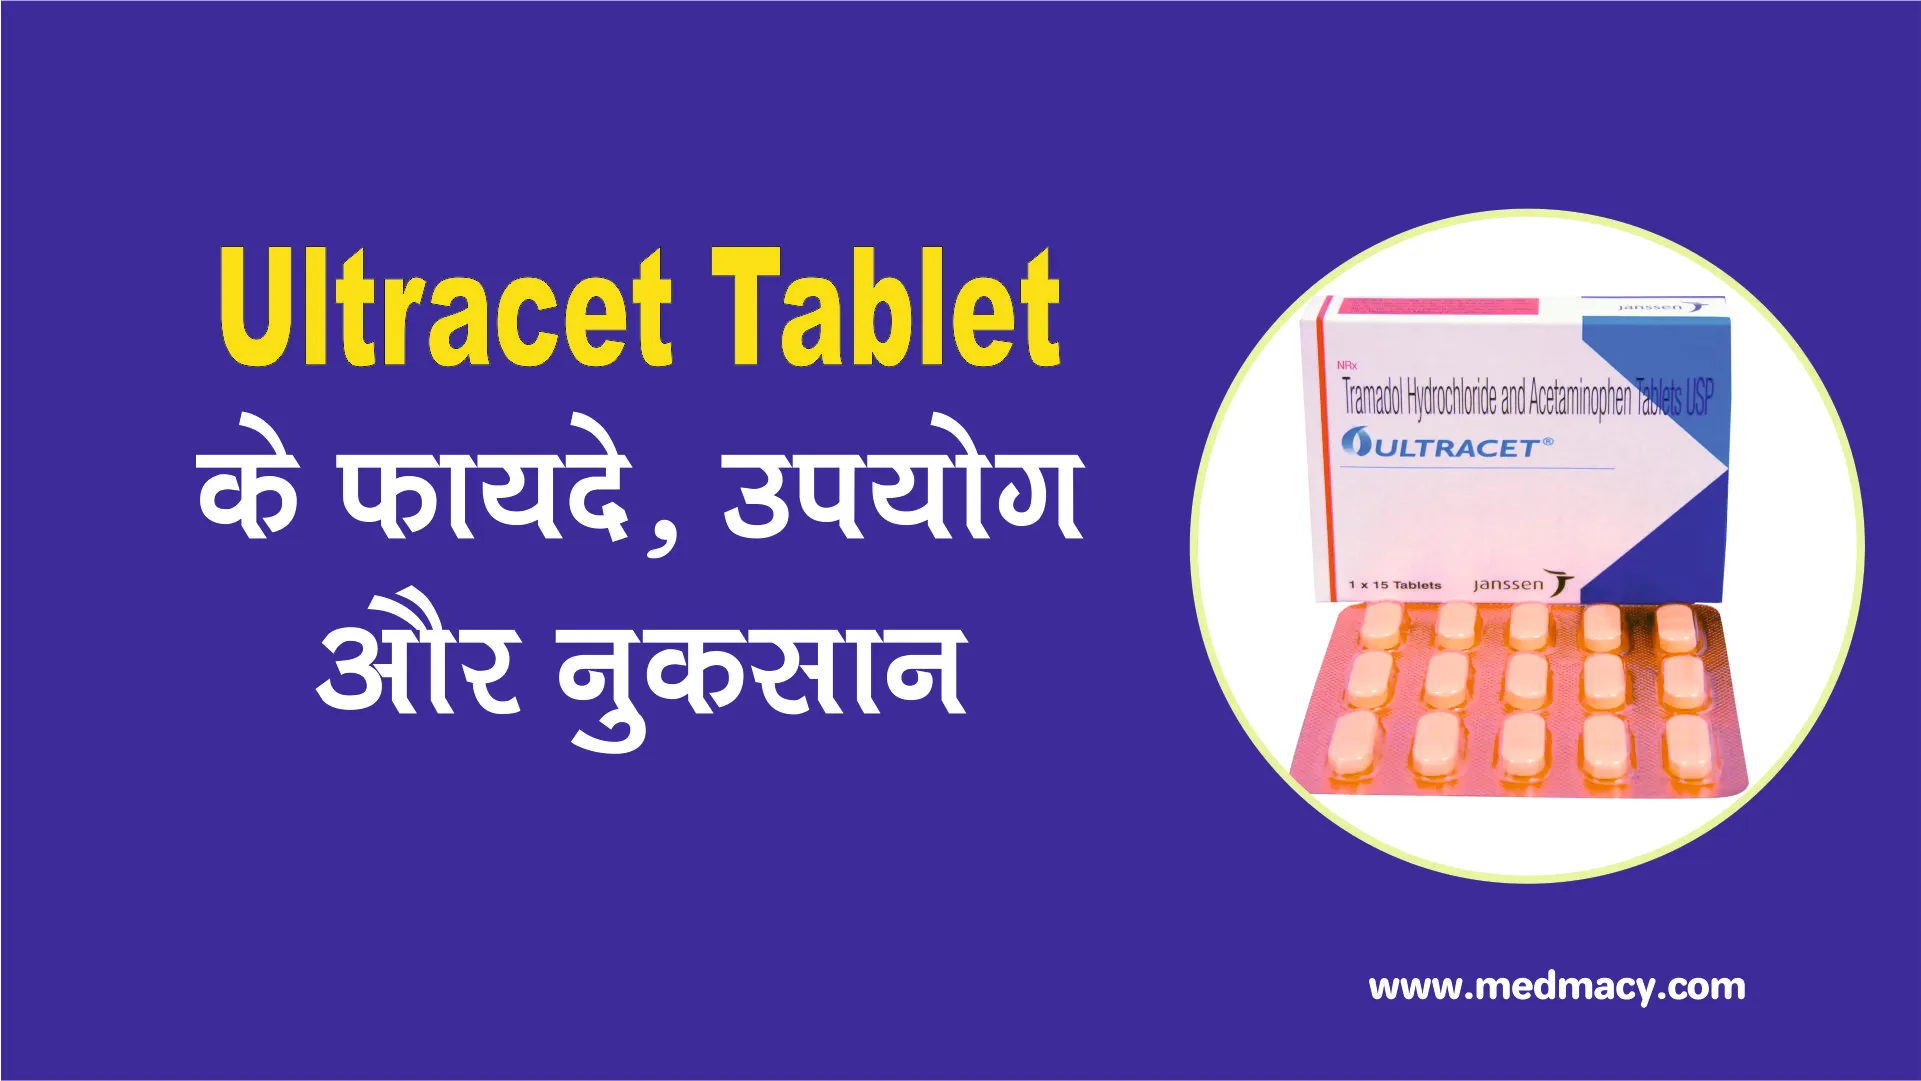 Ultracet Tablet Uses in Hindi